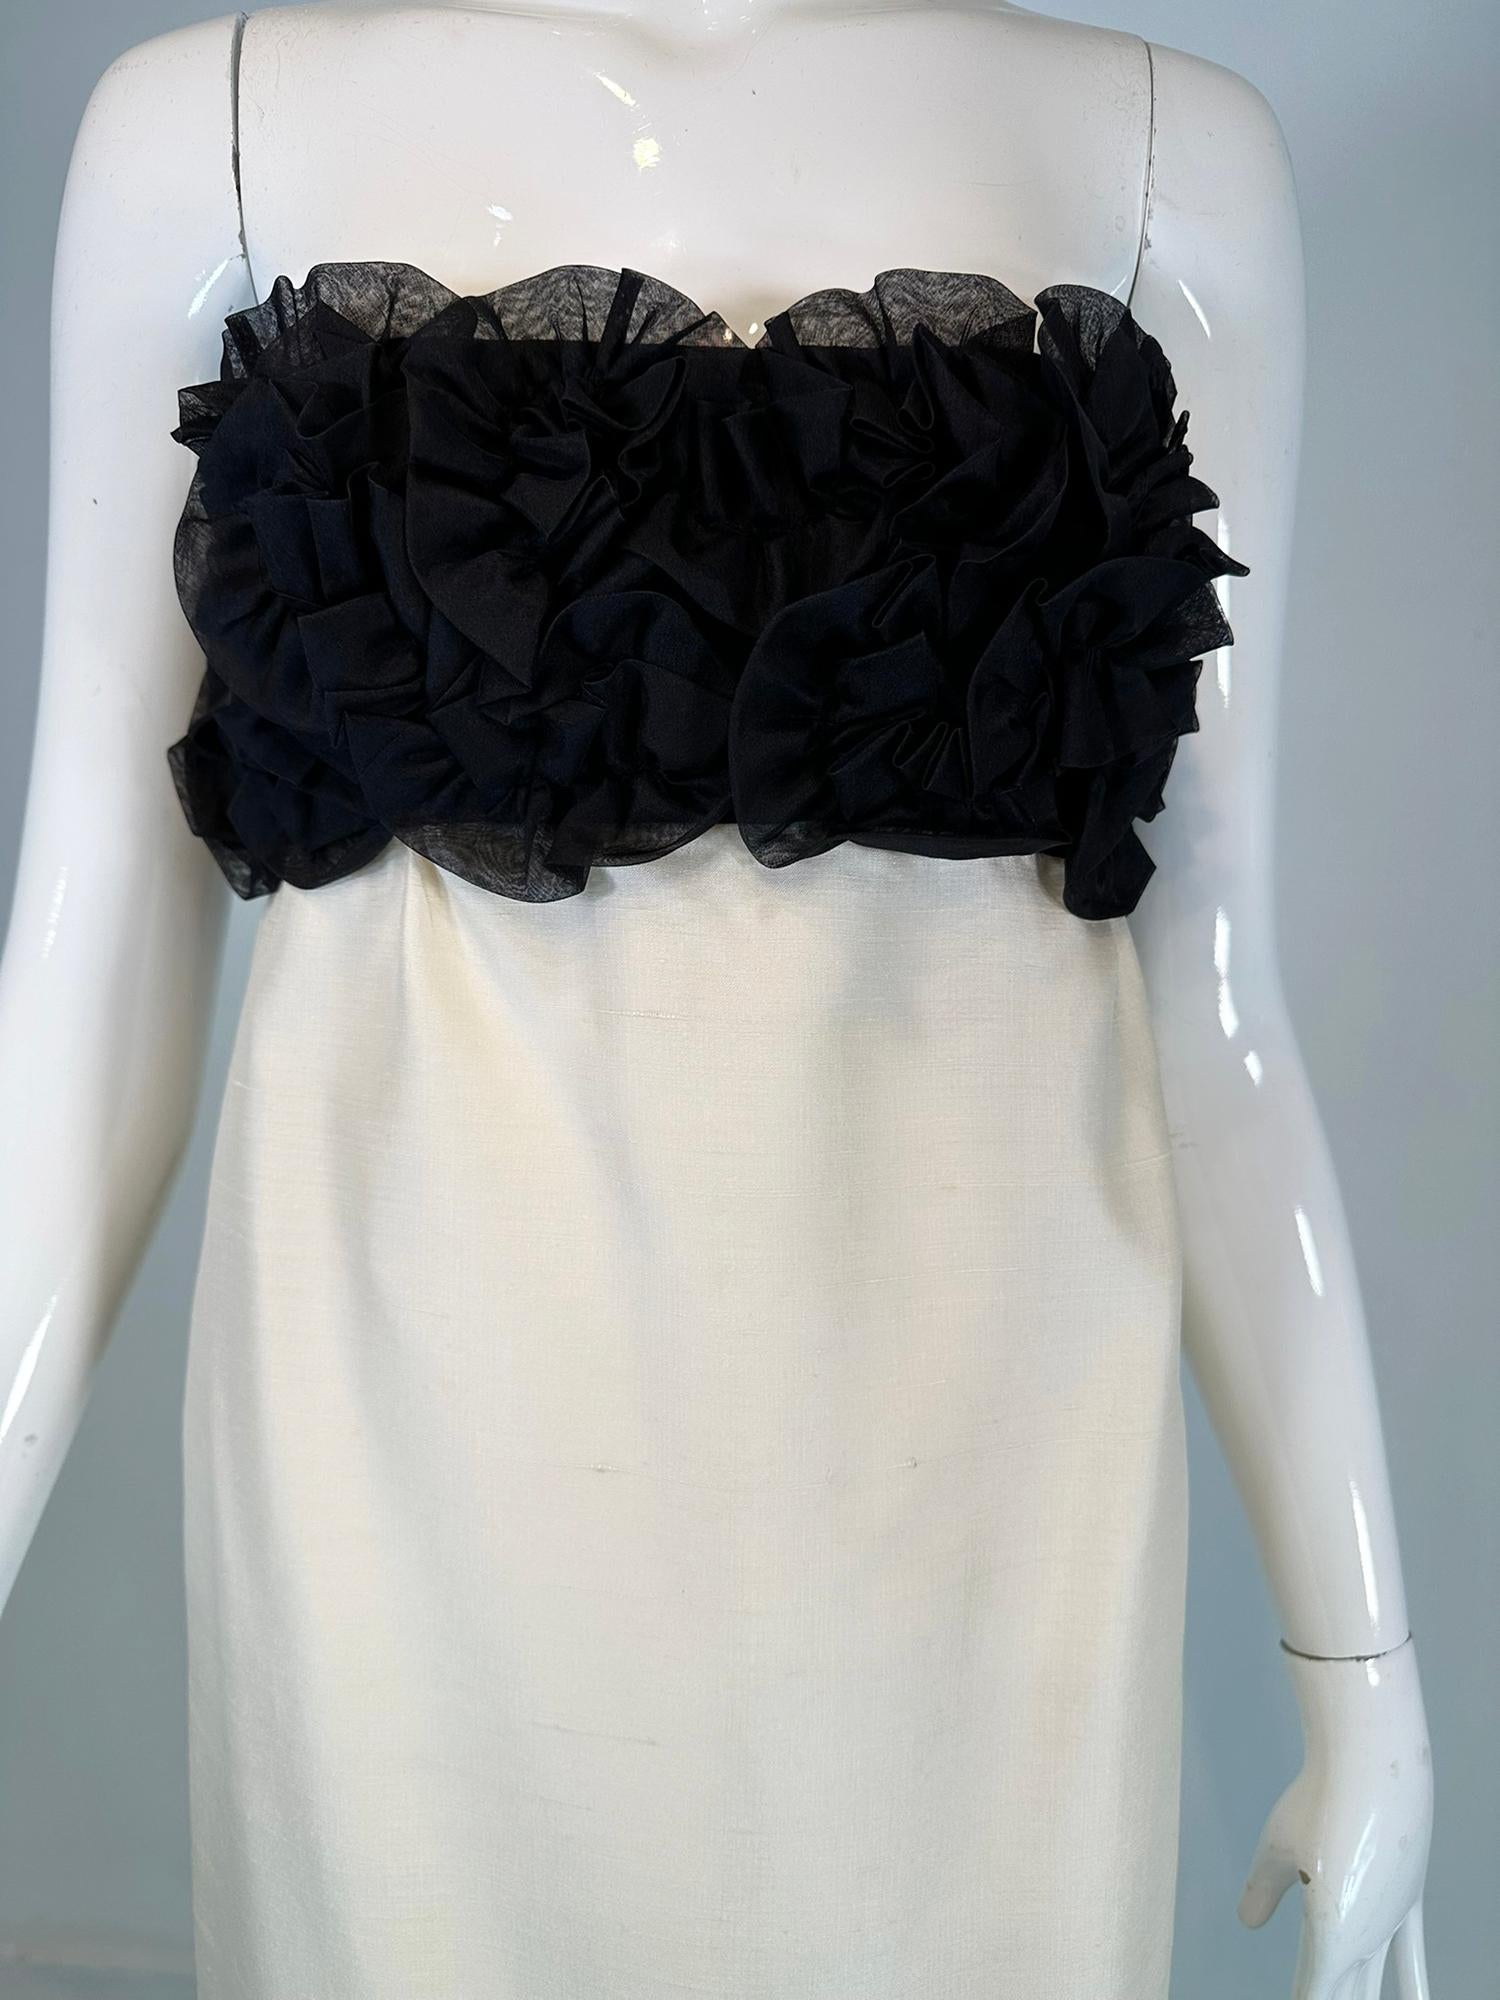 Black & Off White slub silk & silk organza strapless cocktail dress from the 1960s by S.Howard Hirsh California.
100% slub silk strapless cocktail dress from the 1960s that is still relevant today. The bodice is black silk organza with organza 